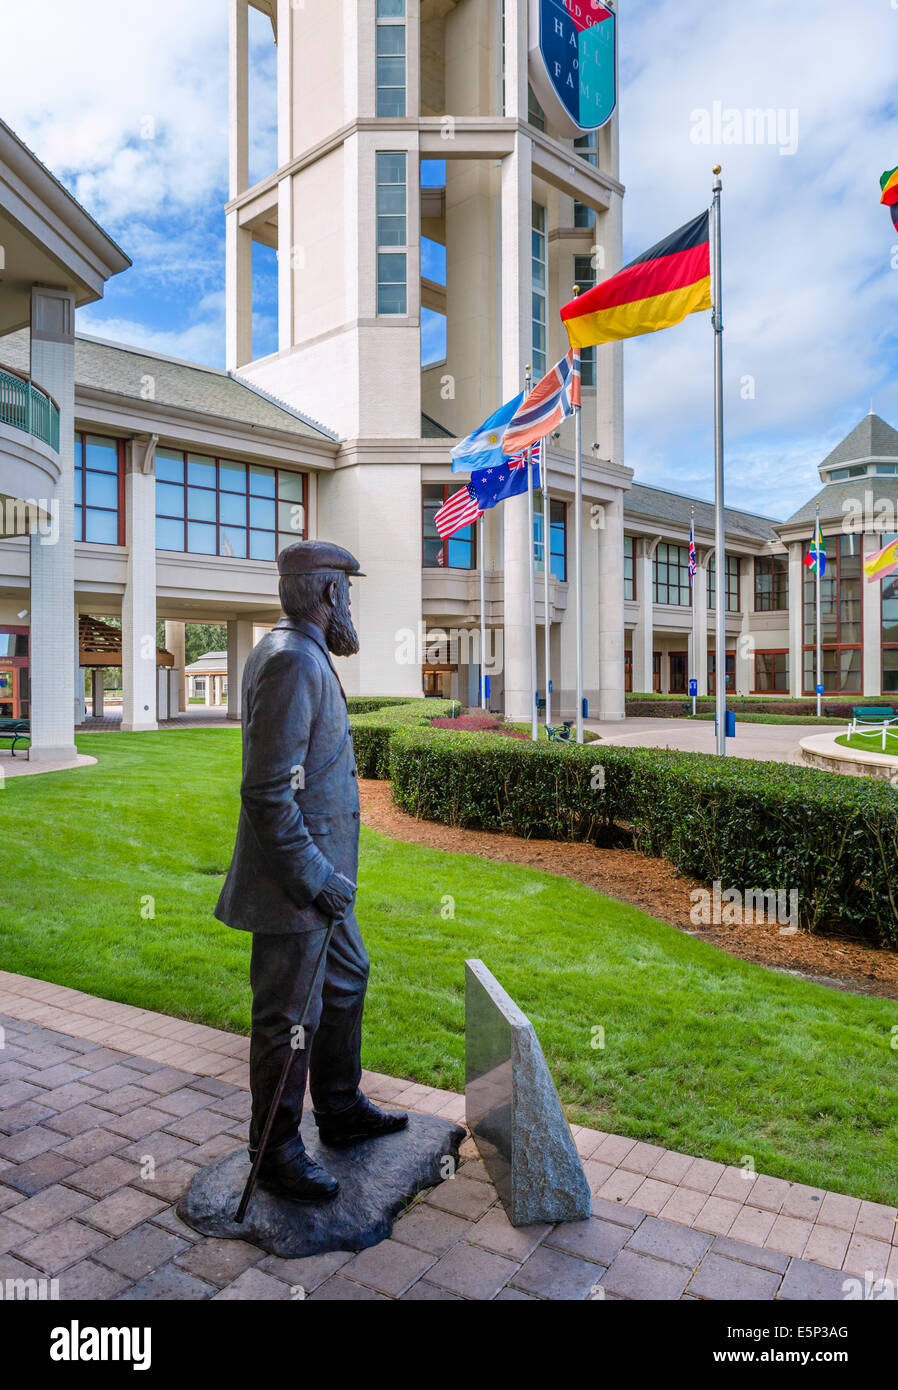 Statue of Old Tom Morris, The World Golf Hall of Fame, near St Augustine, Florida, USA Stock Photo